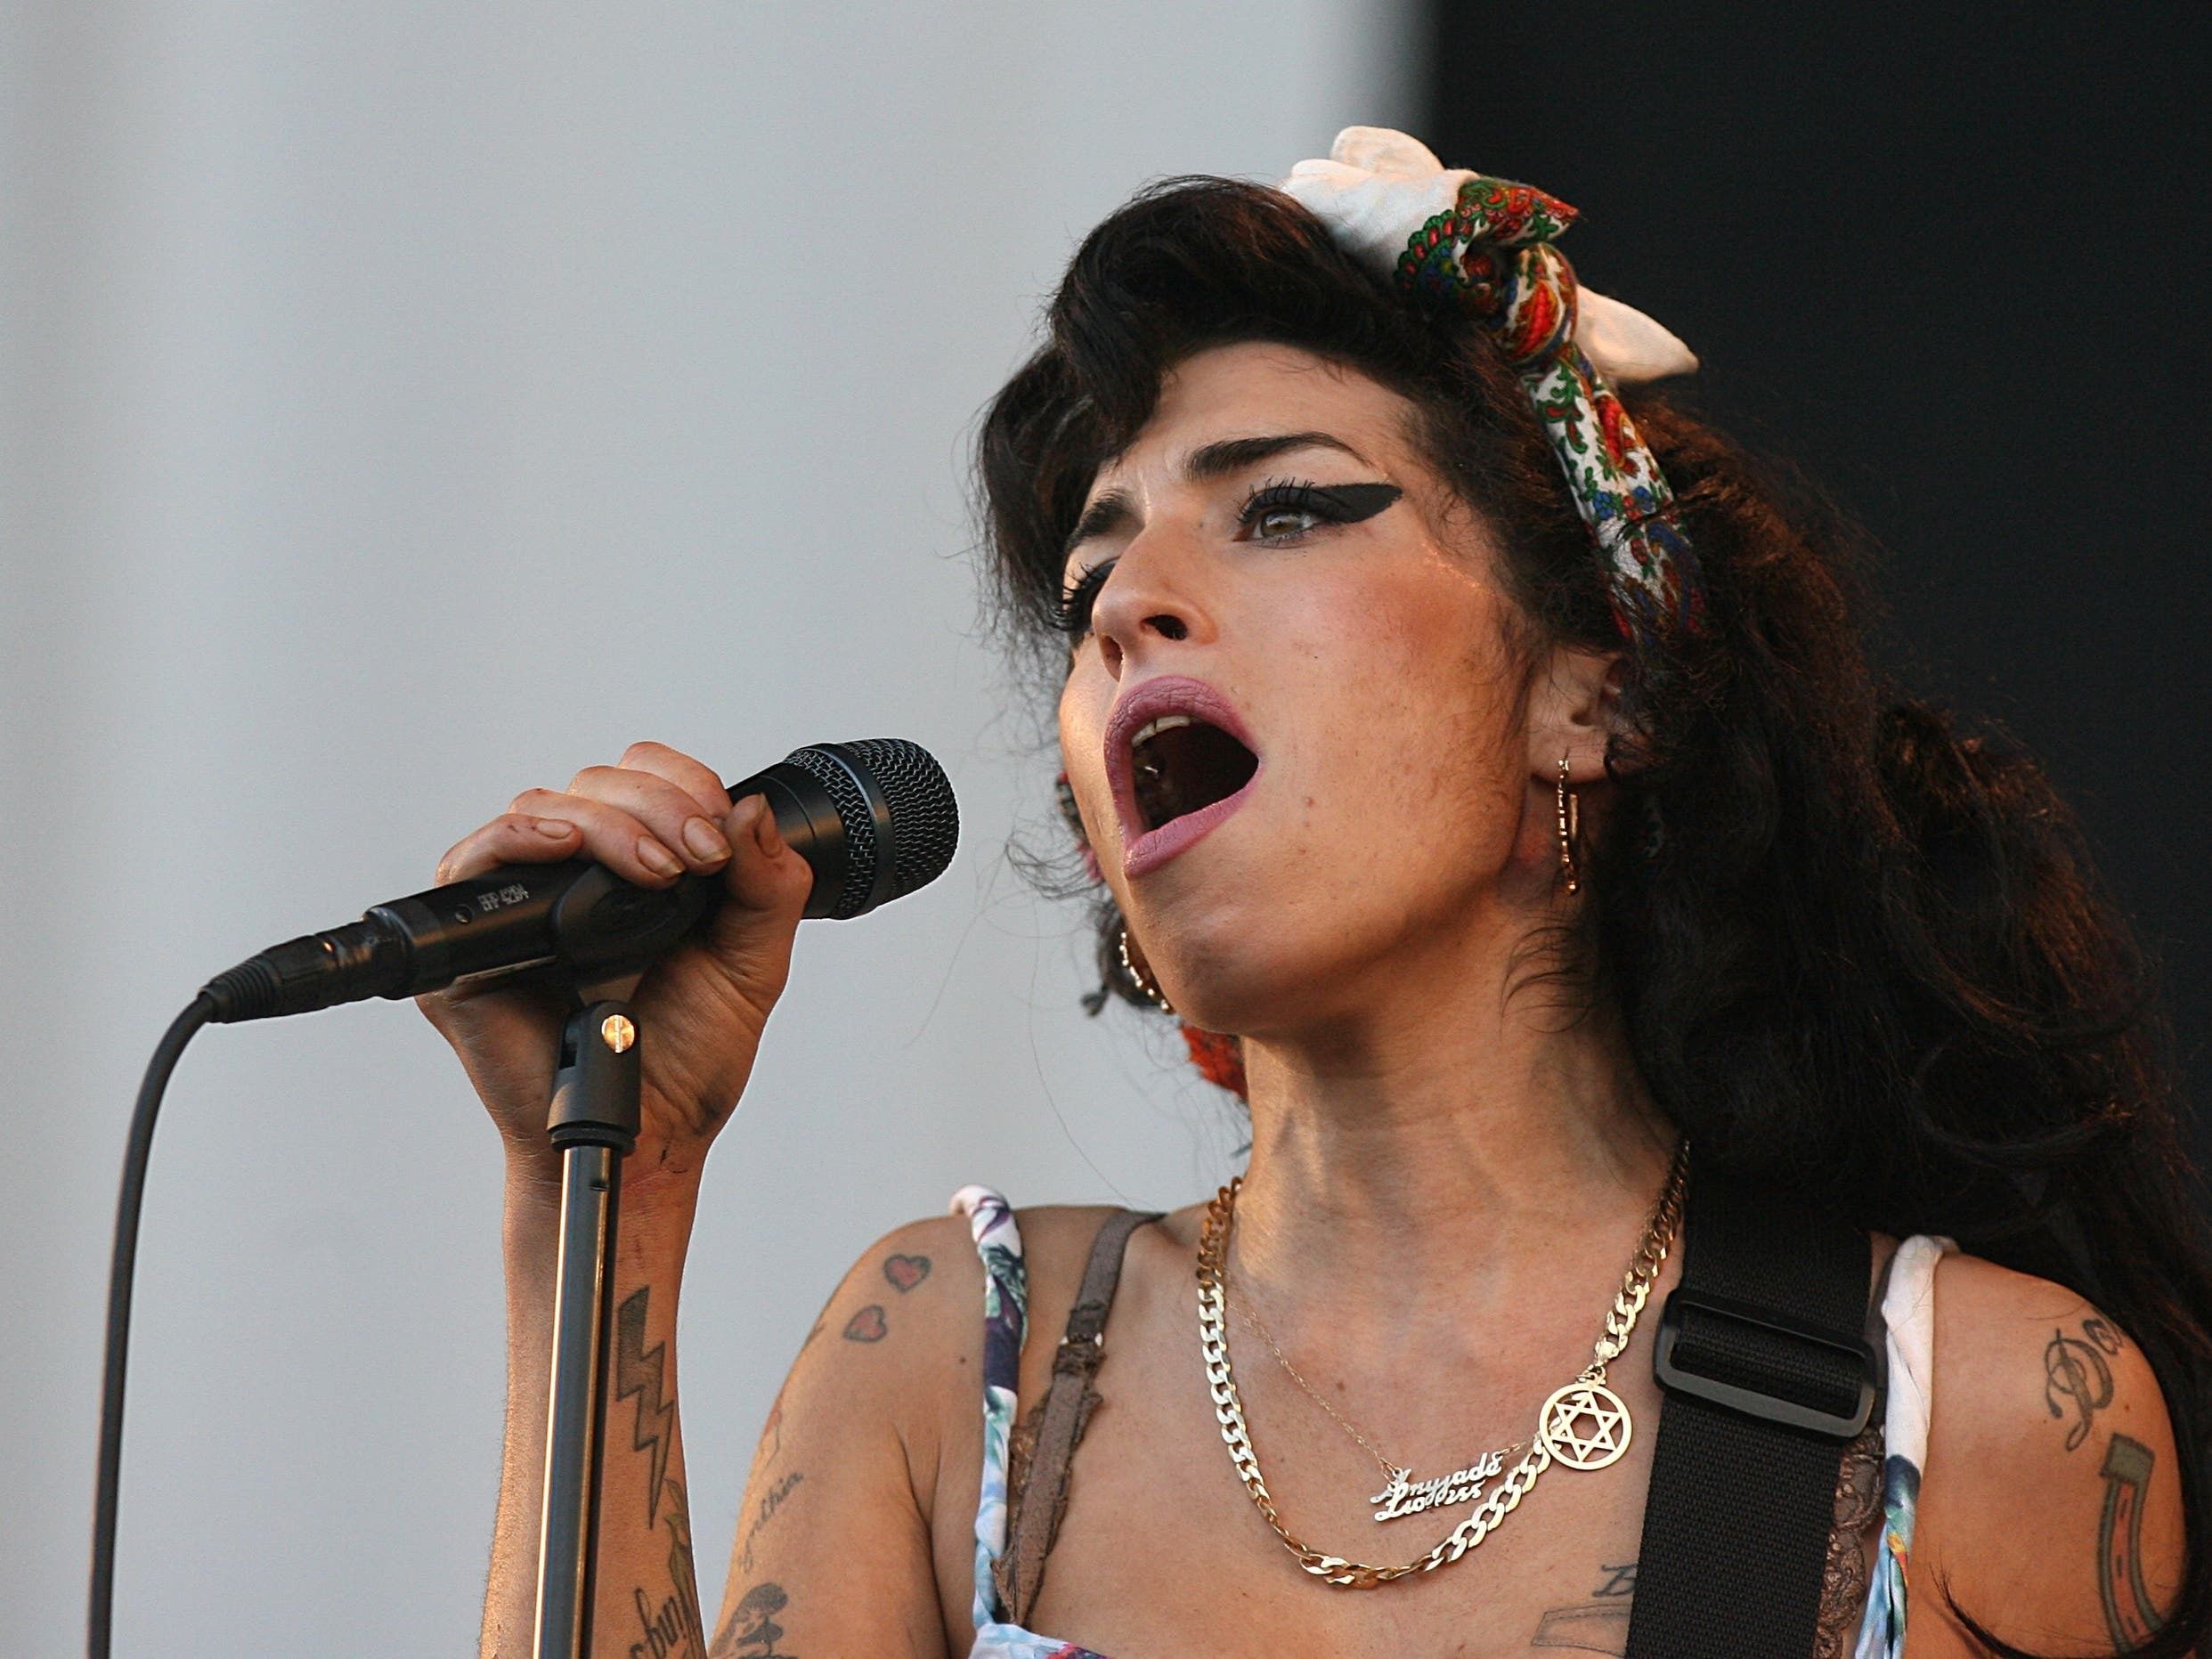 Evidence of ‘suspicious circumstances’ around Amy Winehouse auctions, court told